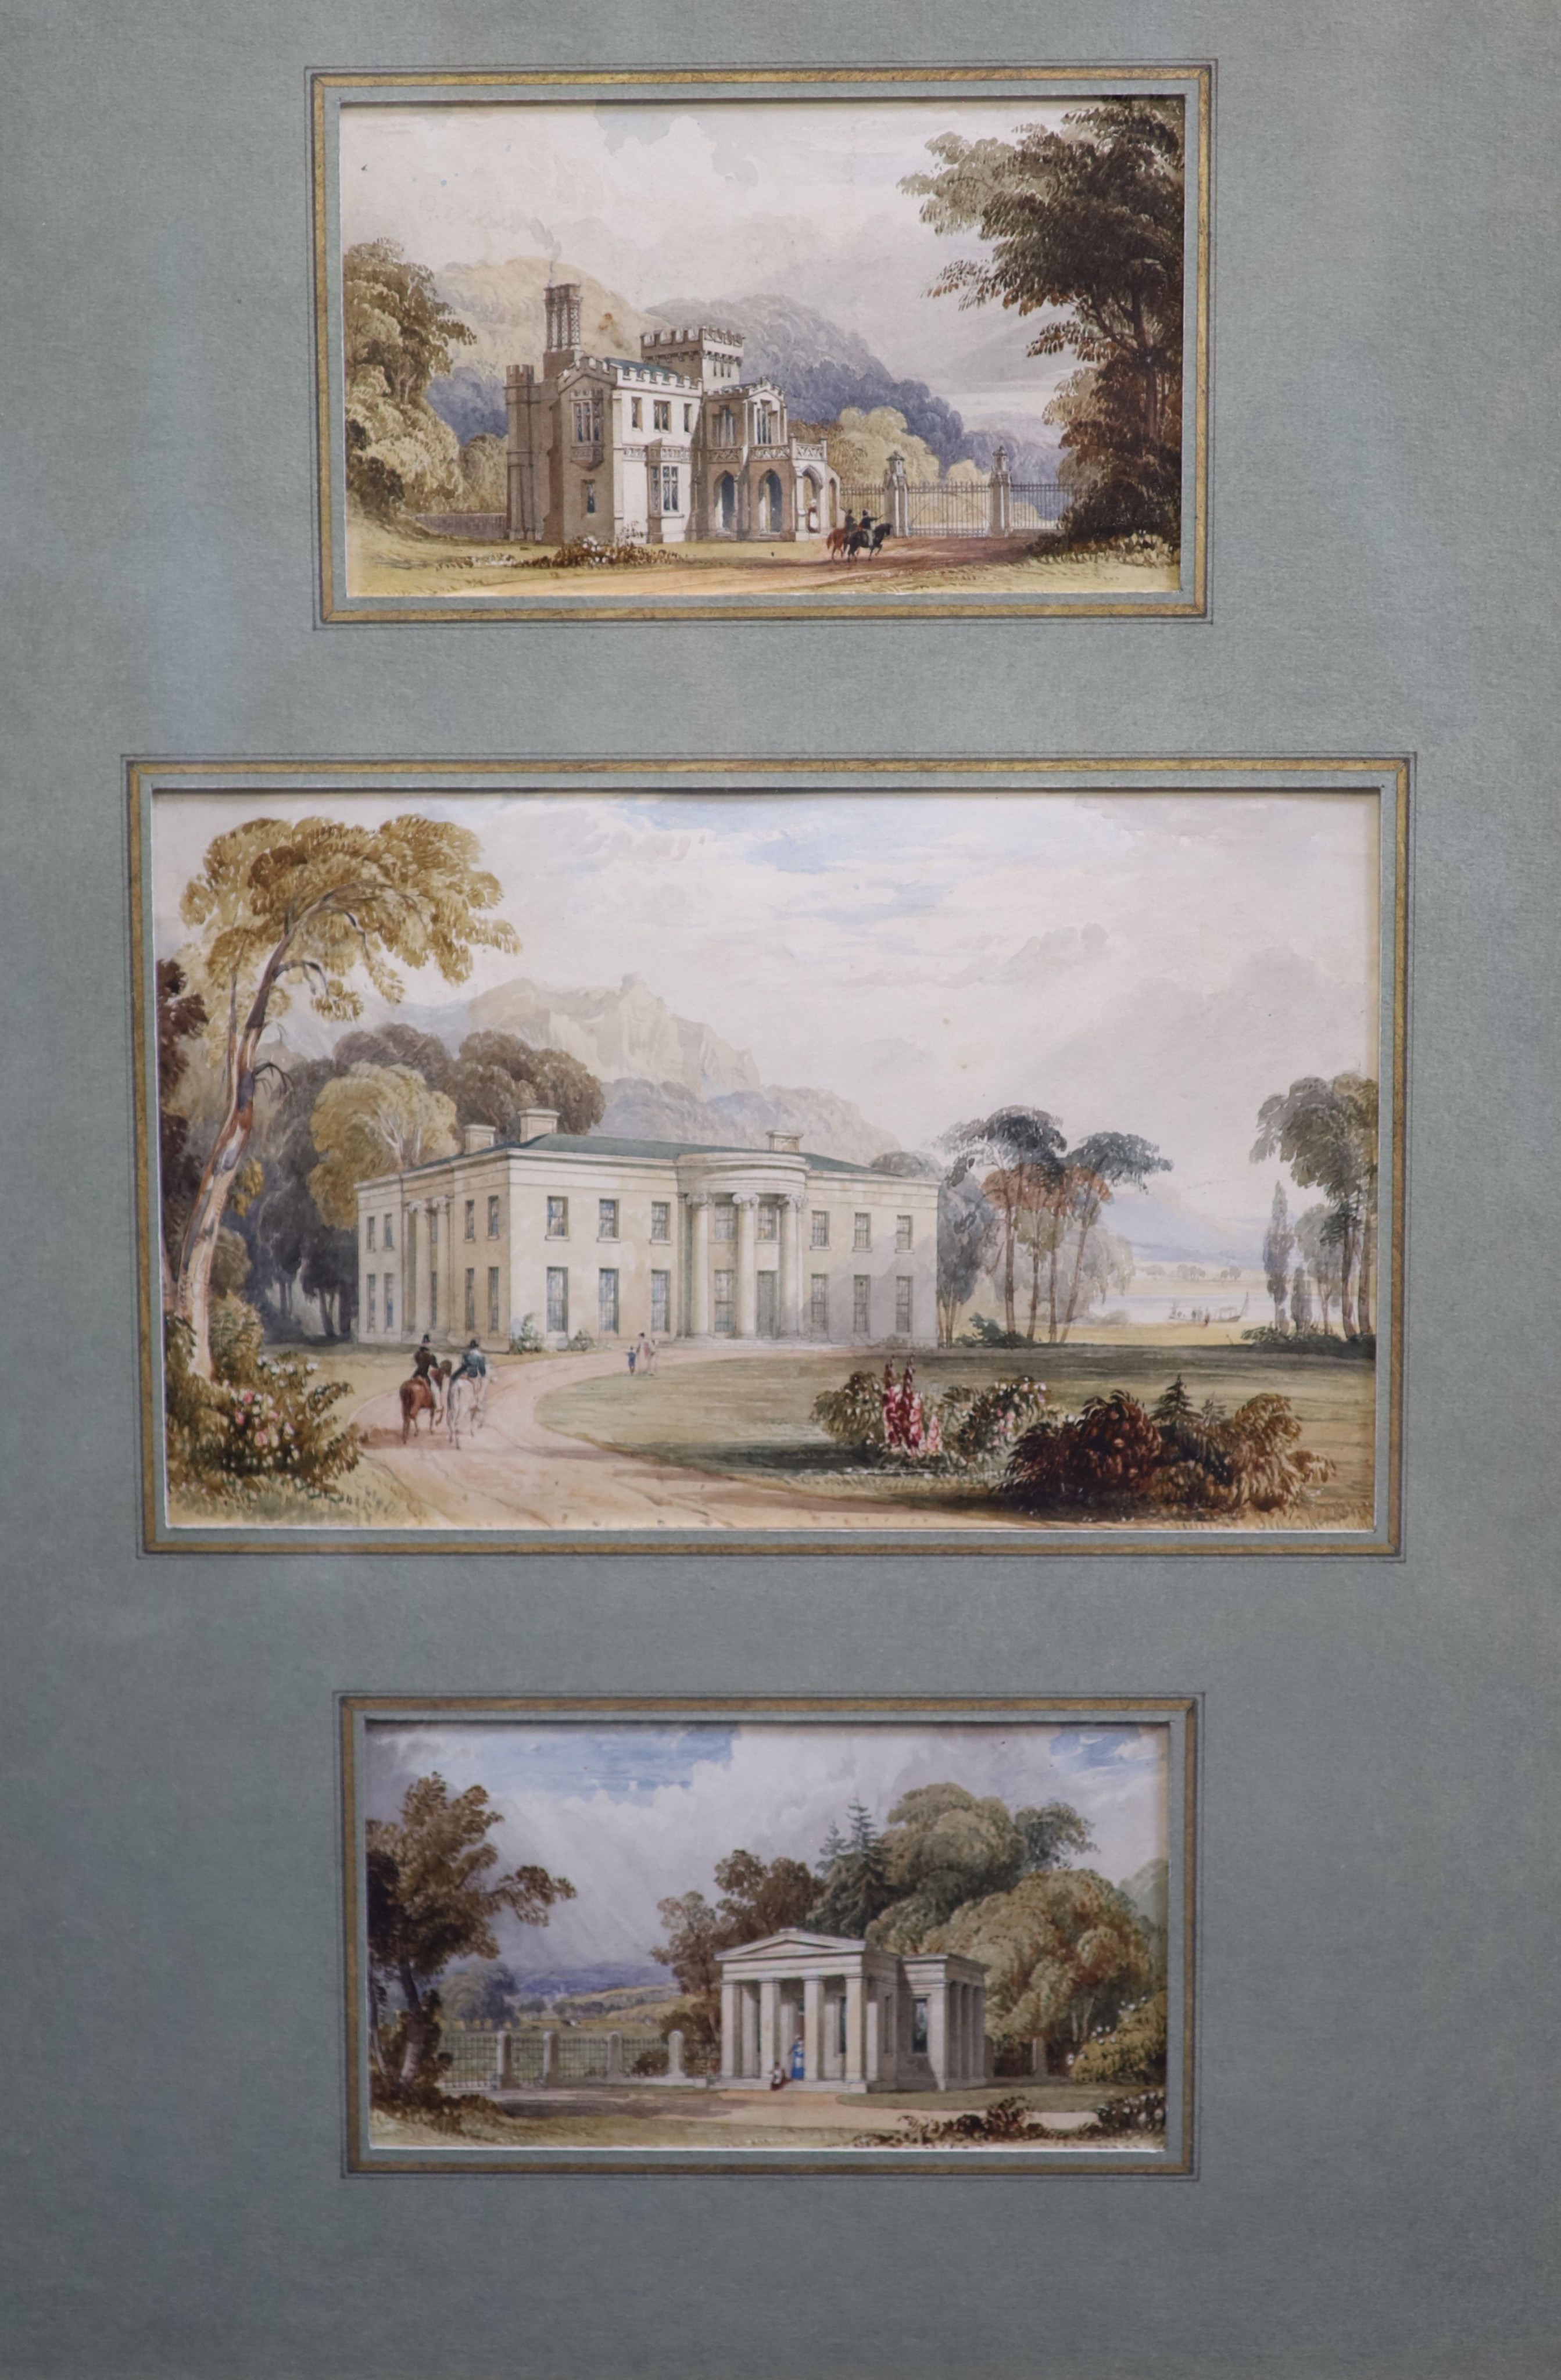 Francis Goodwin (1784-1835), Designs for Greek Revival and Rustic Country Houses, six watercolour drawings on paper, 16 x 26cm and 10 x 18cm in two frames